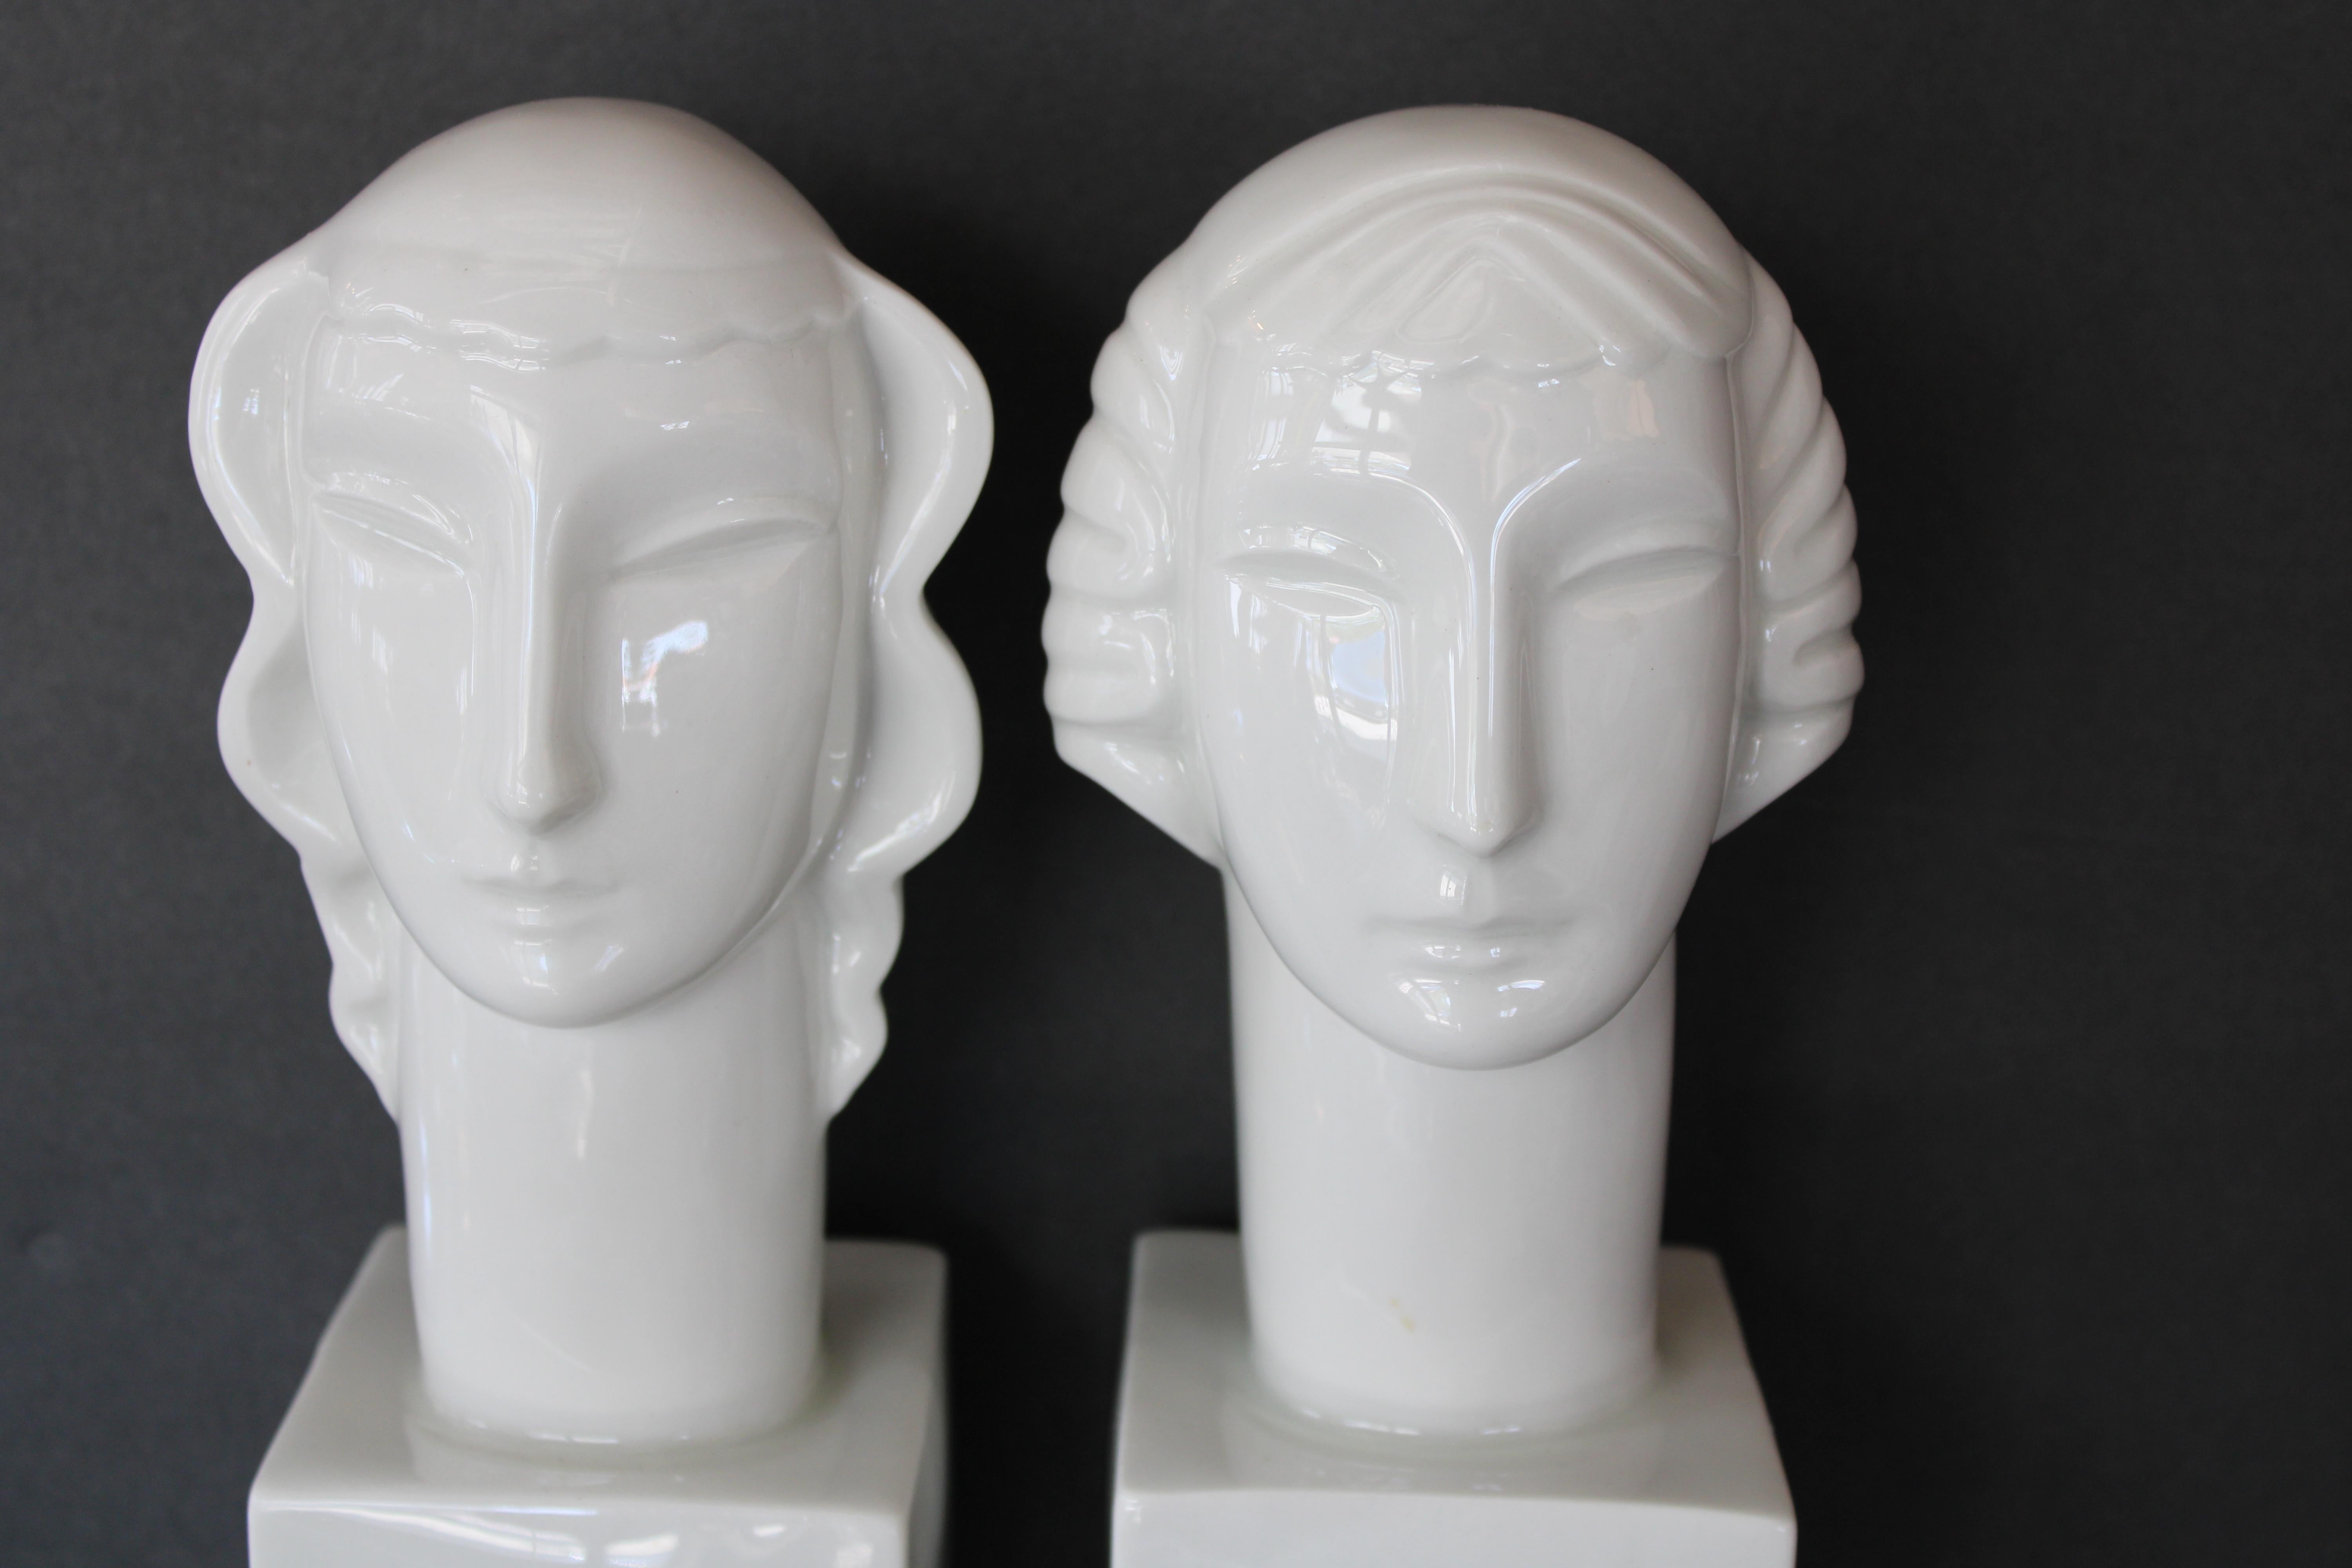 Pair of art deco ceramic figures by Geza de Vegh (1905-1989) the Hungarian-American sculptor who created a range of pieces for the Lenox and Lamberton Scammell porcelain works, both in Trenton, New Jersey.  Each sculpture measures 3.5